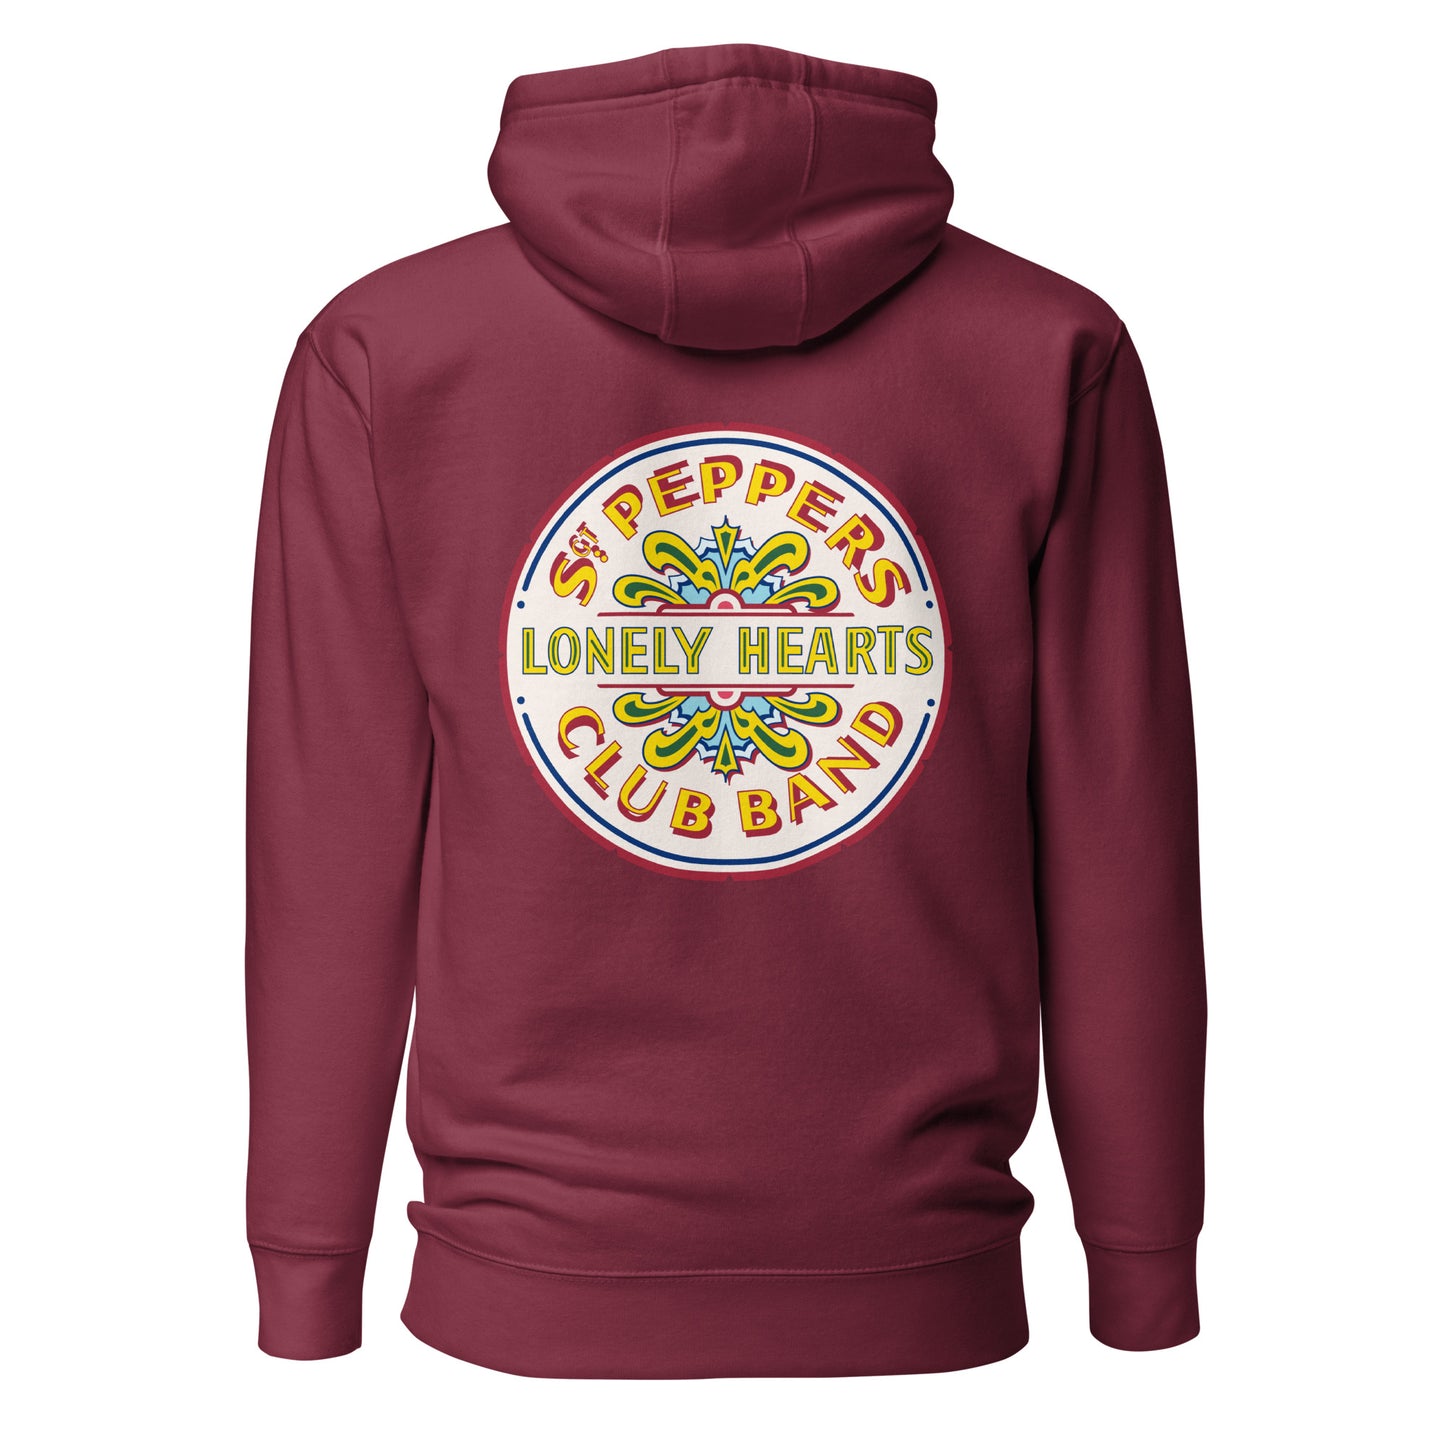 The Beatles Sgt. Peppers Lonely Hearts Club Band Mix Hooded Fleece